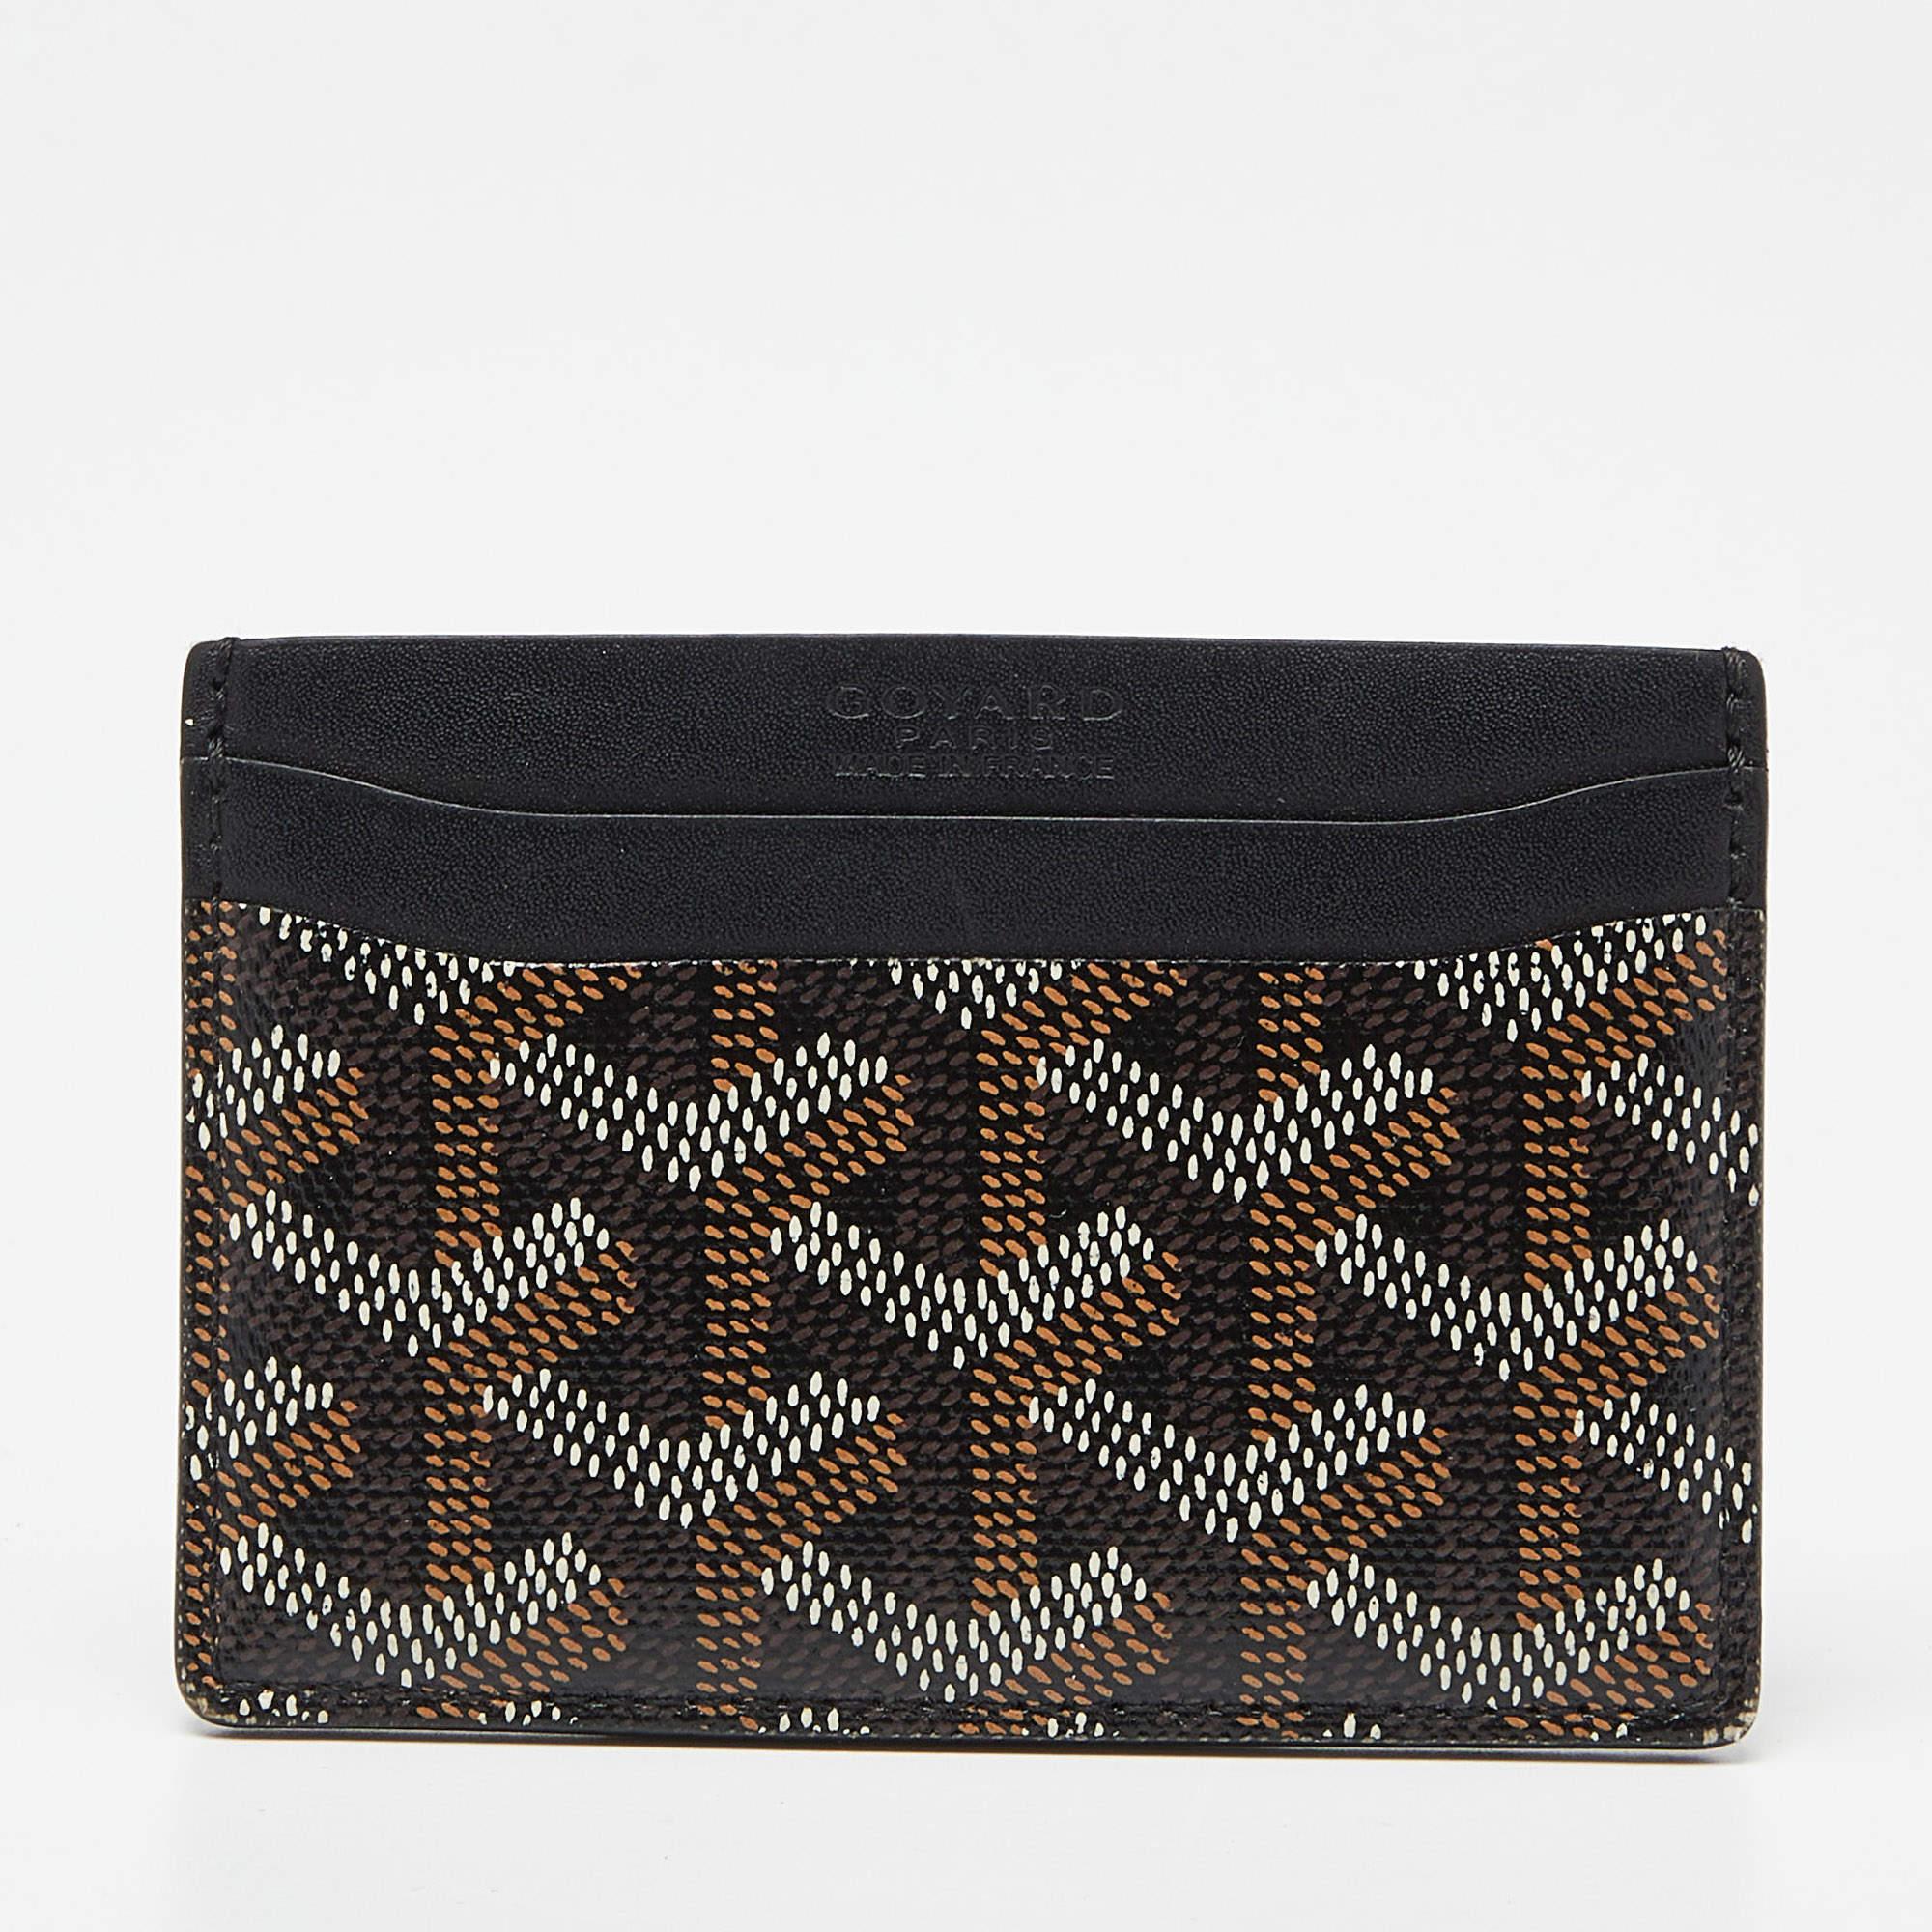 Named after the Saint Sulpice Church located in France and made popular by Dan Brown's best-selling novel The Da Vinci Code, Goyard's cardholder symbolizes art and culture along with being a versatile accessory. Made in France from the label's